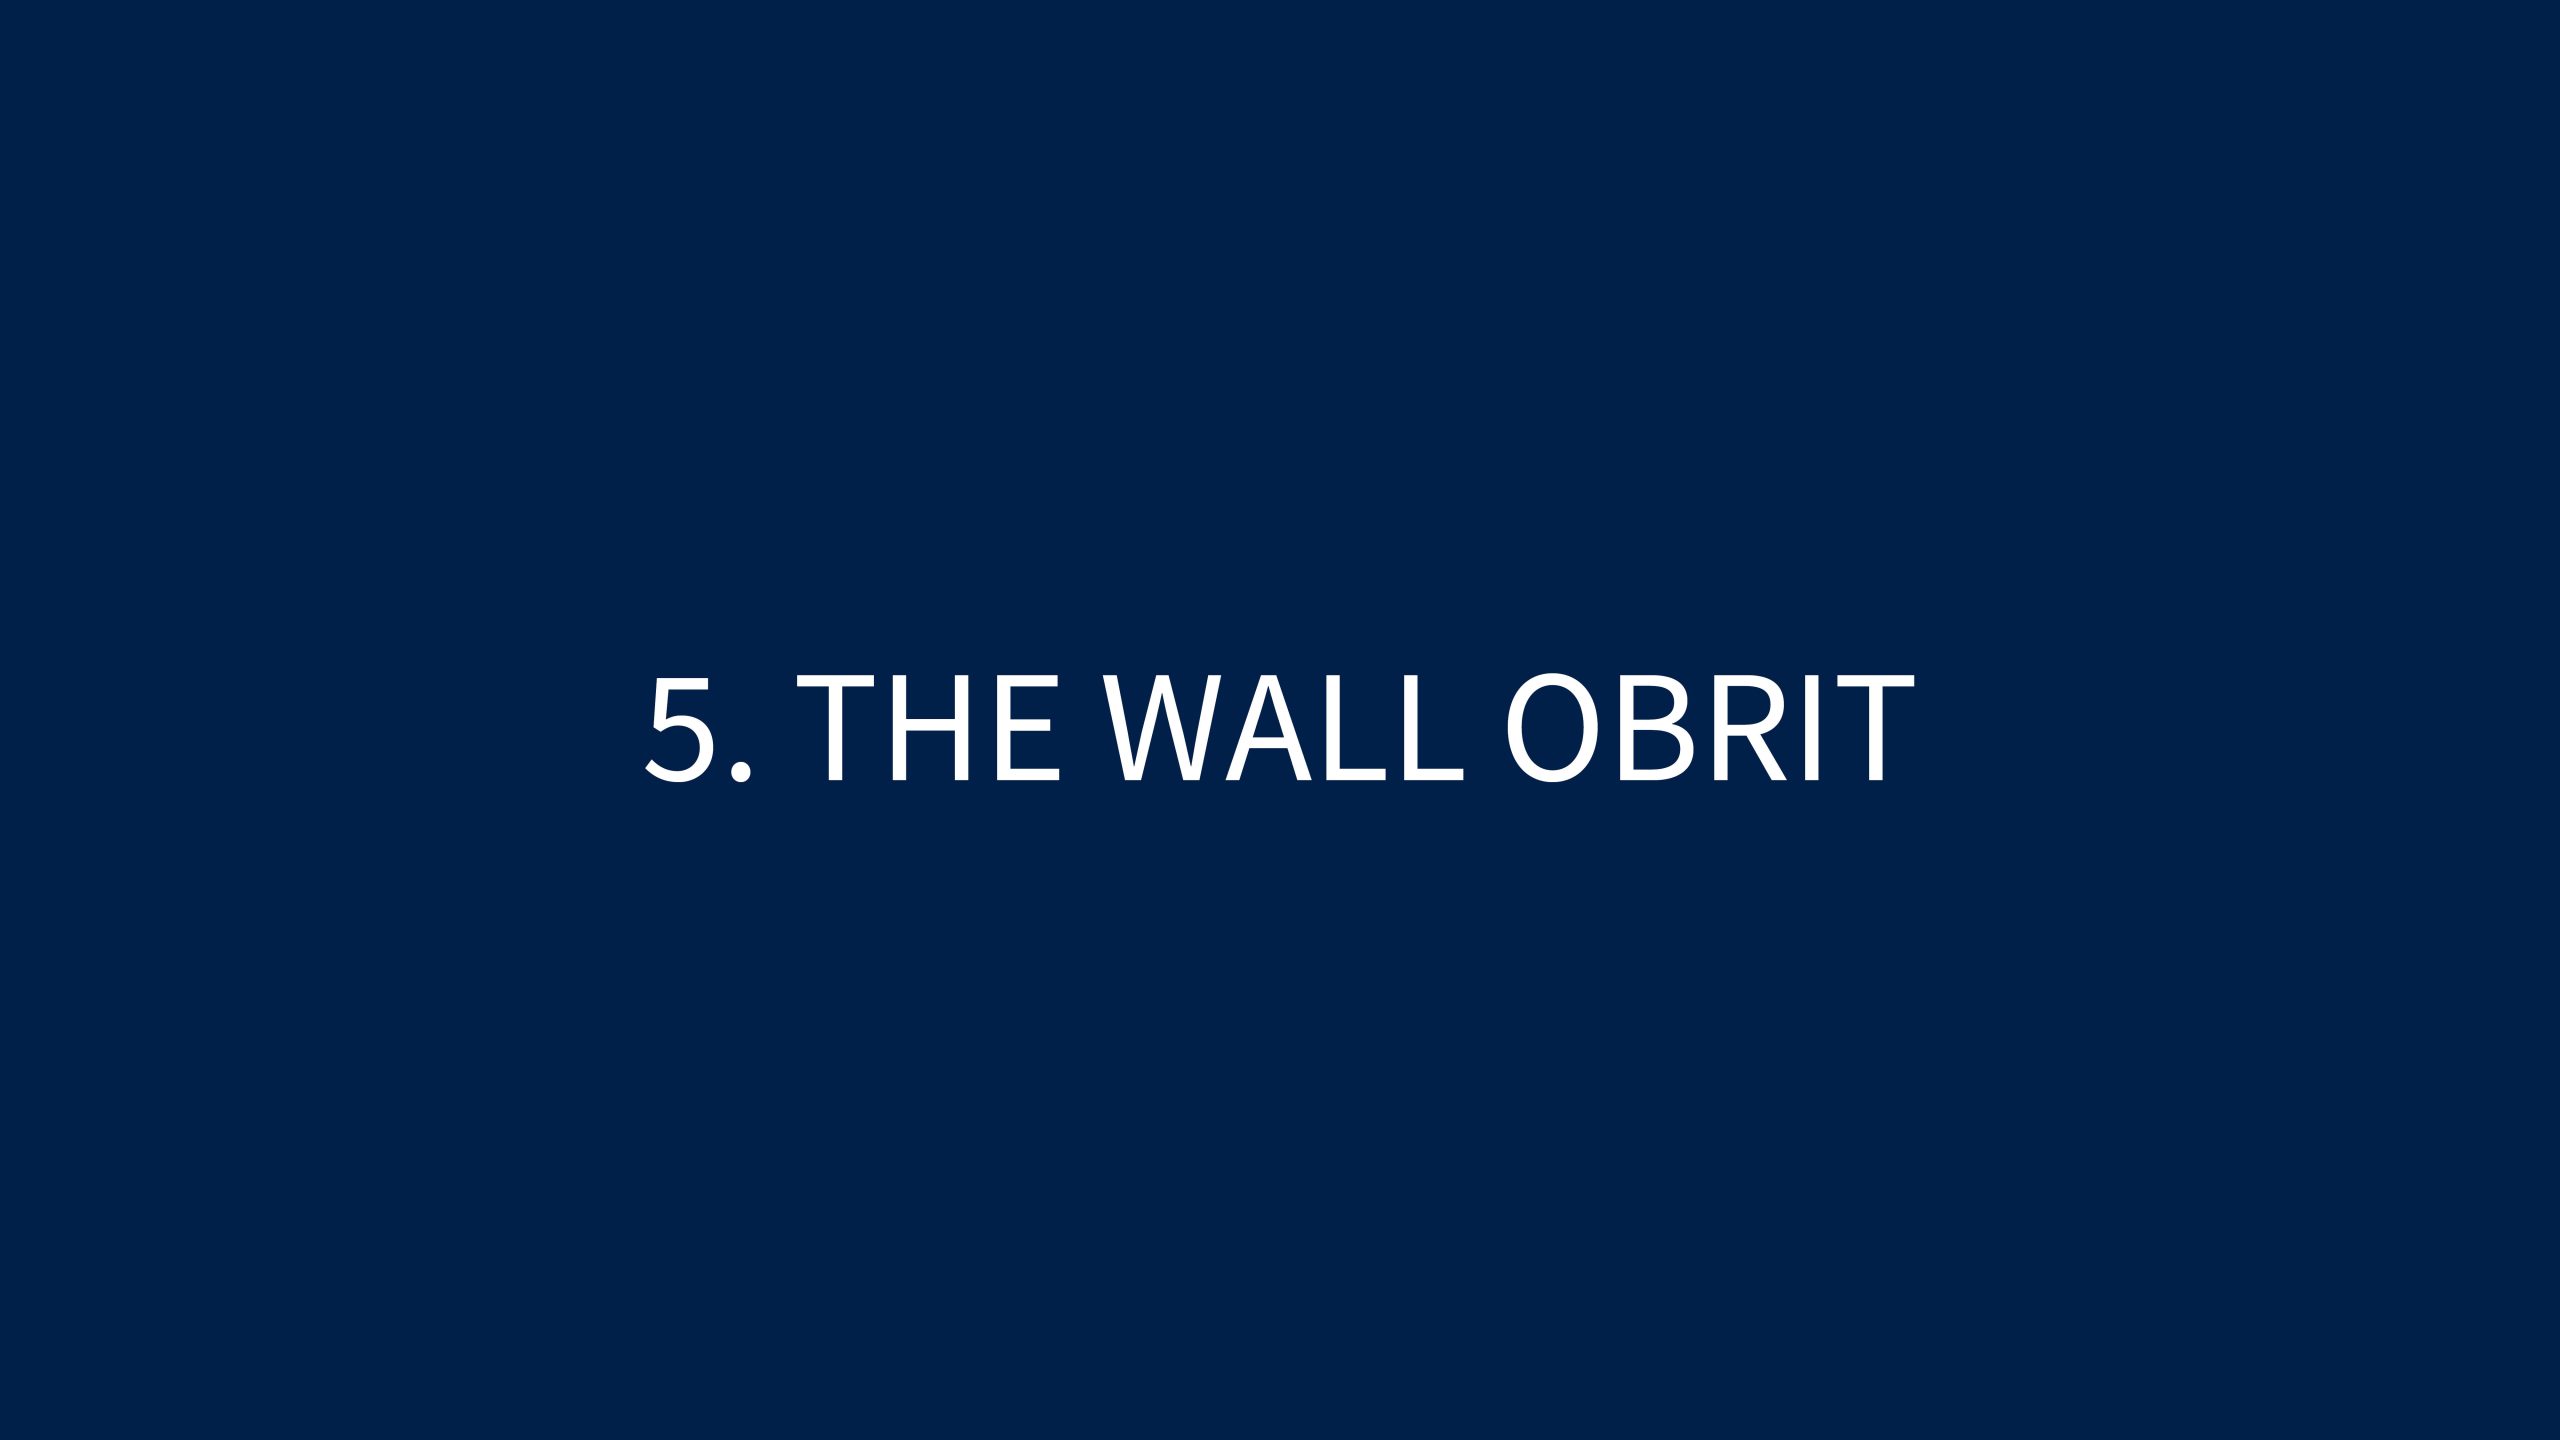 5 THE WALL OBRIT